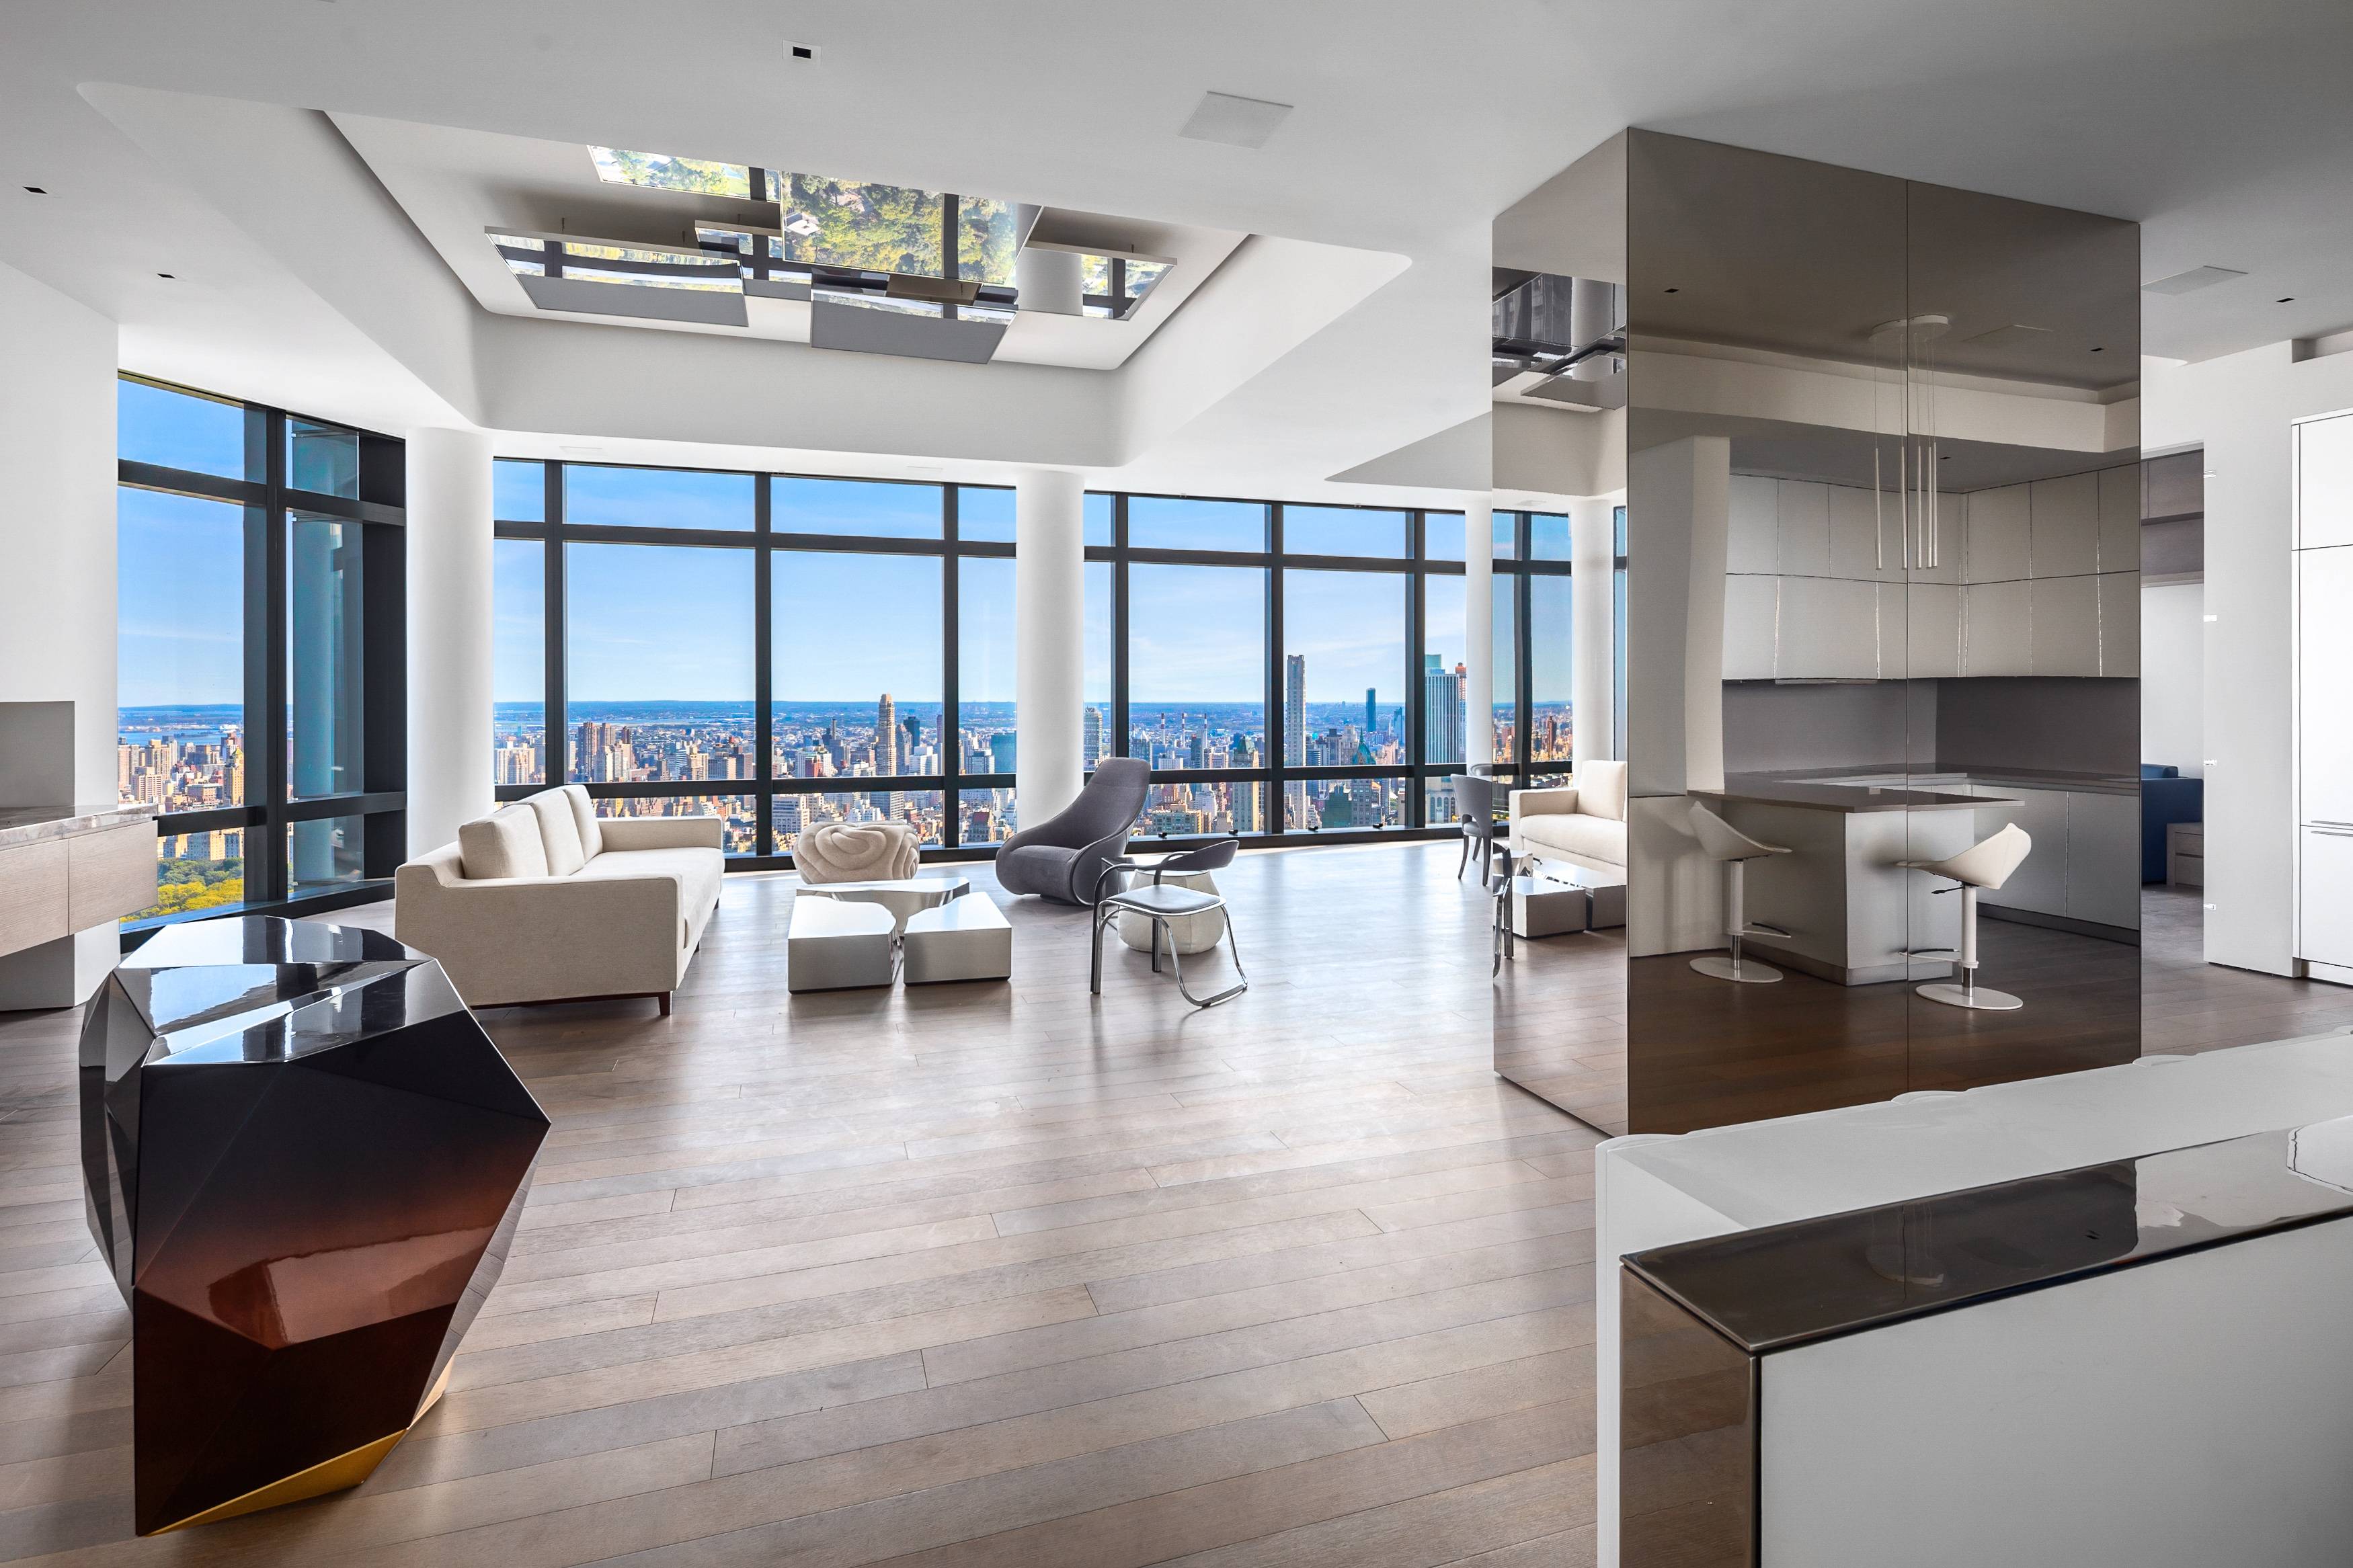 With commanding views across Central Park and up the Hudson River, this custom built, 4 bedroom, 4.